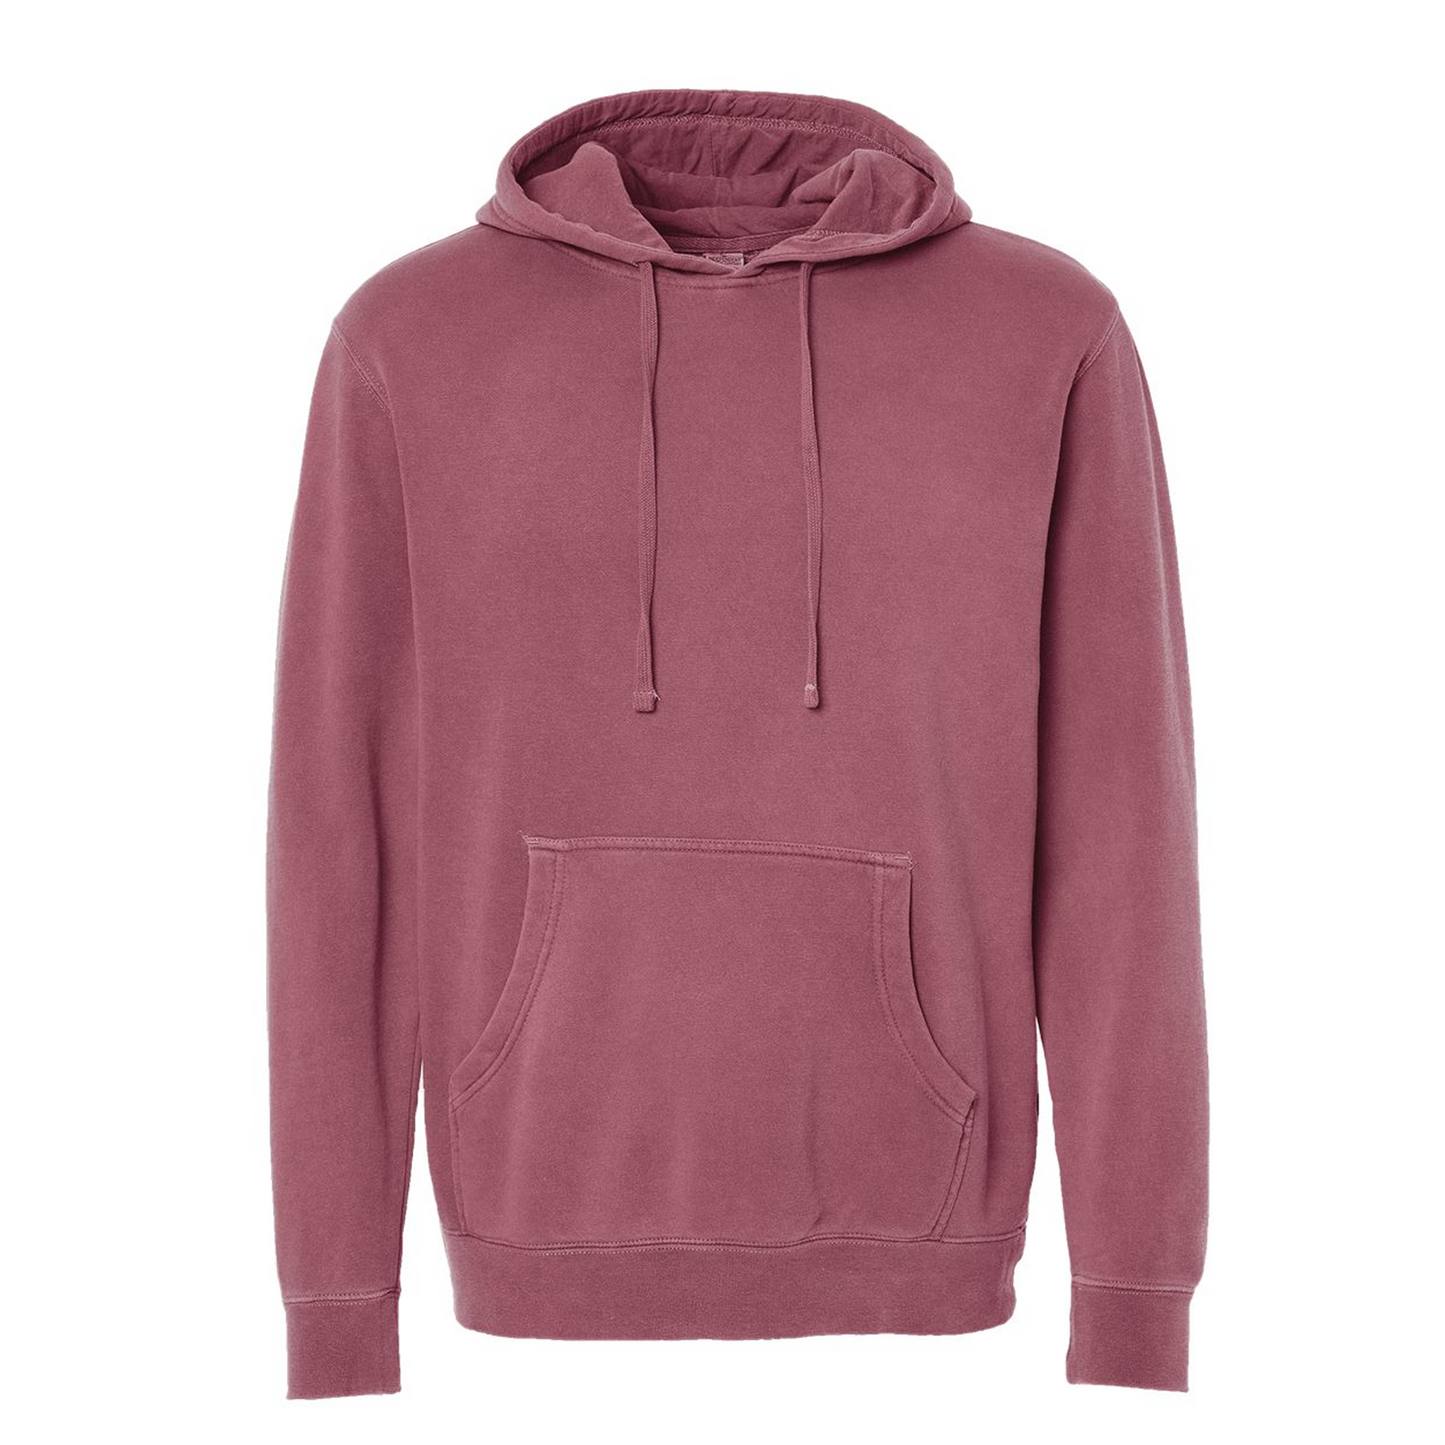 Independent Trading Co. - Midweight Pigment-Dyed Hooded Sweatshirt - PRM4500